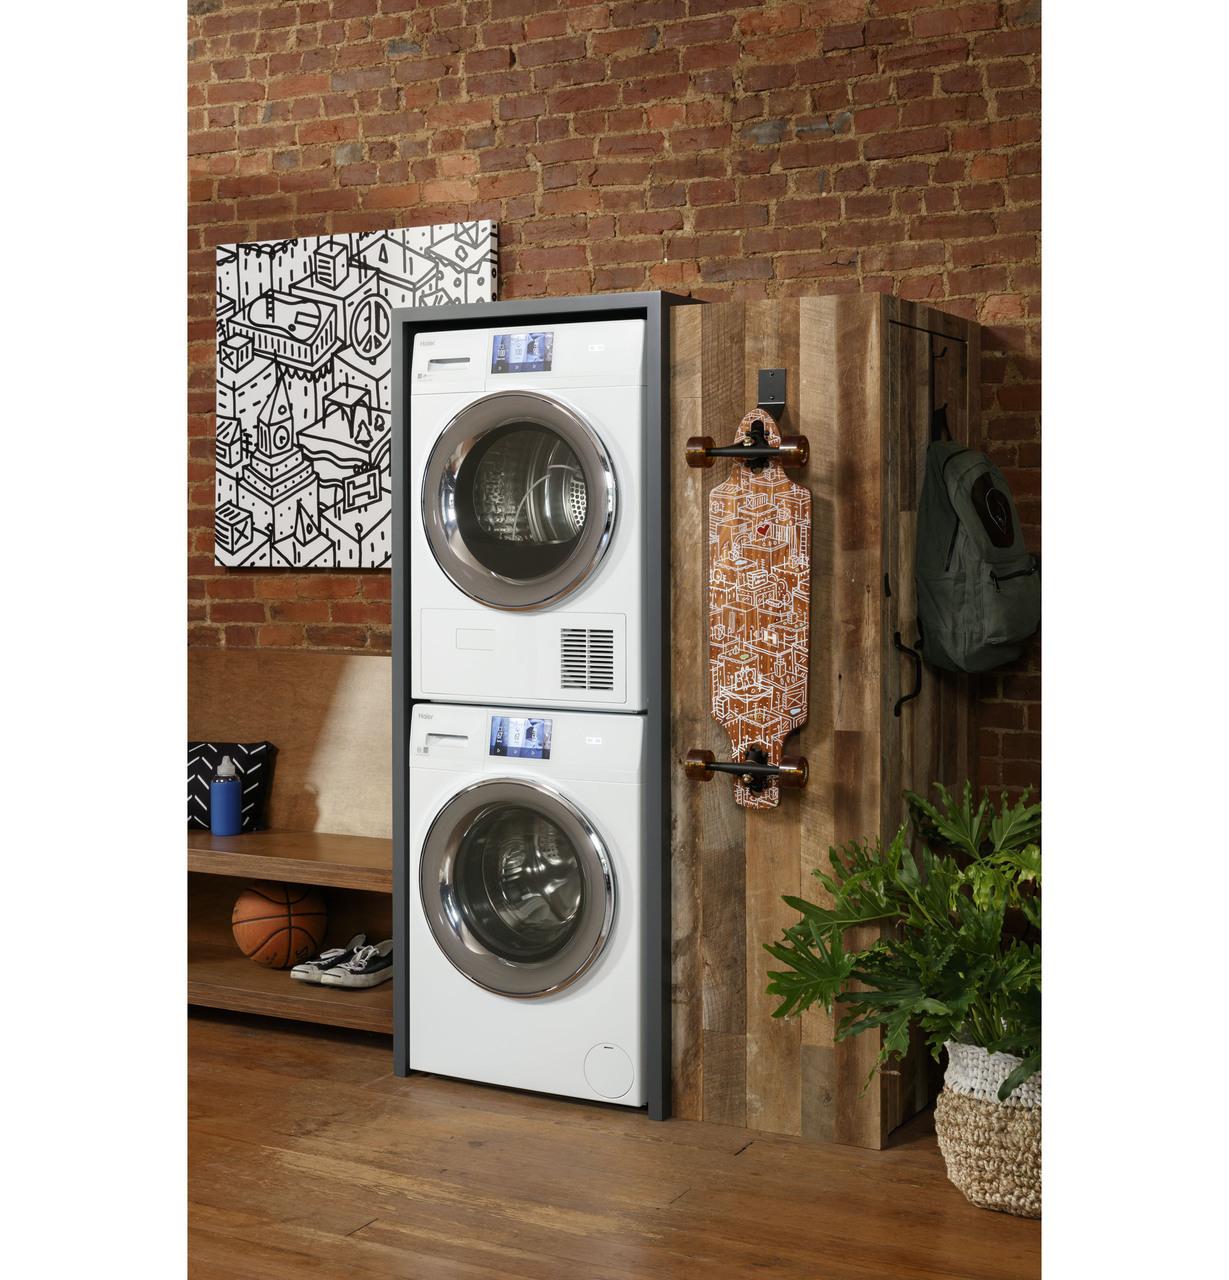 Haier ENERGY STAR® 2.4 Cu. Ft. Smart Frontload Washer